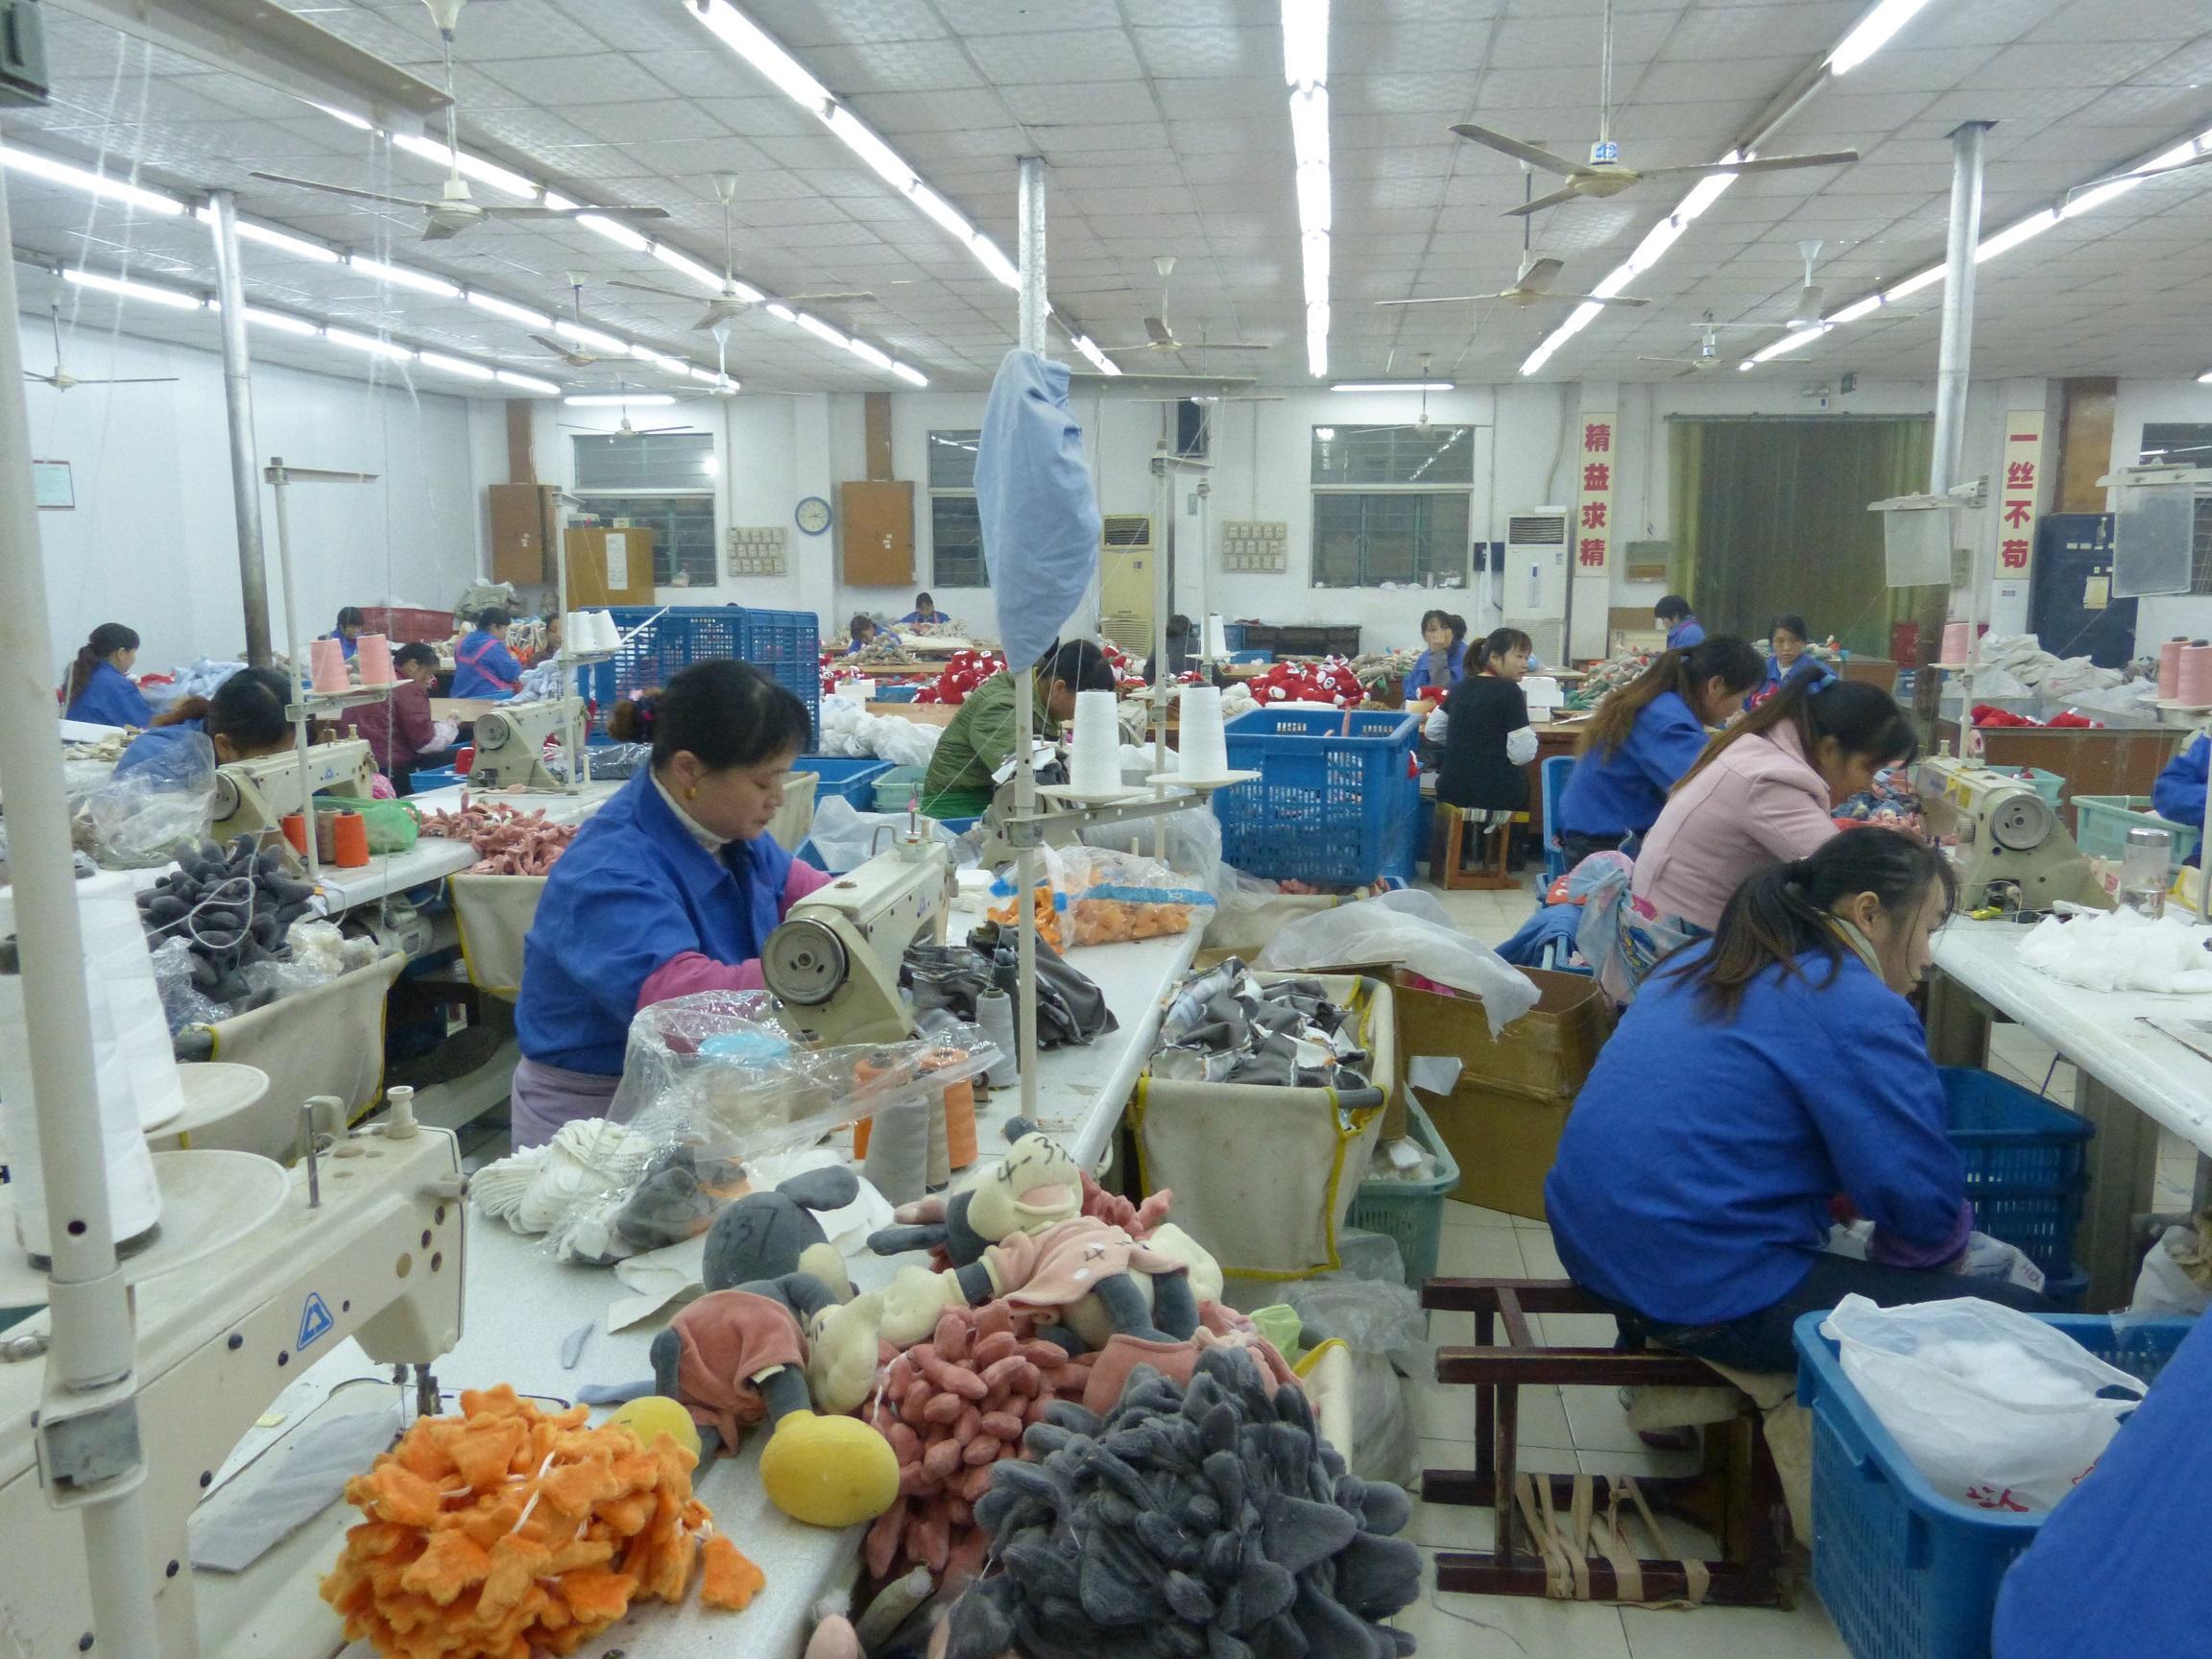 Sewing factory